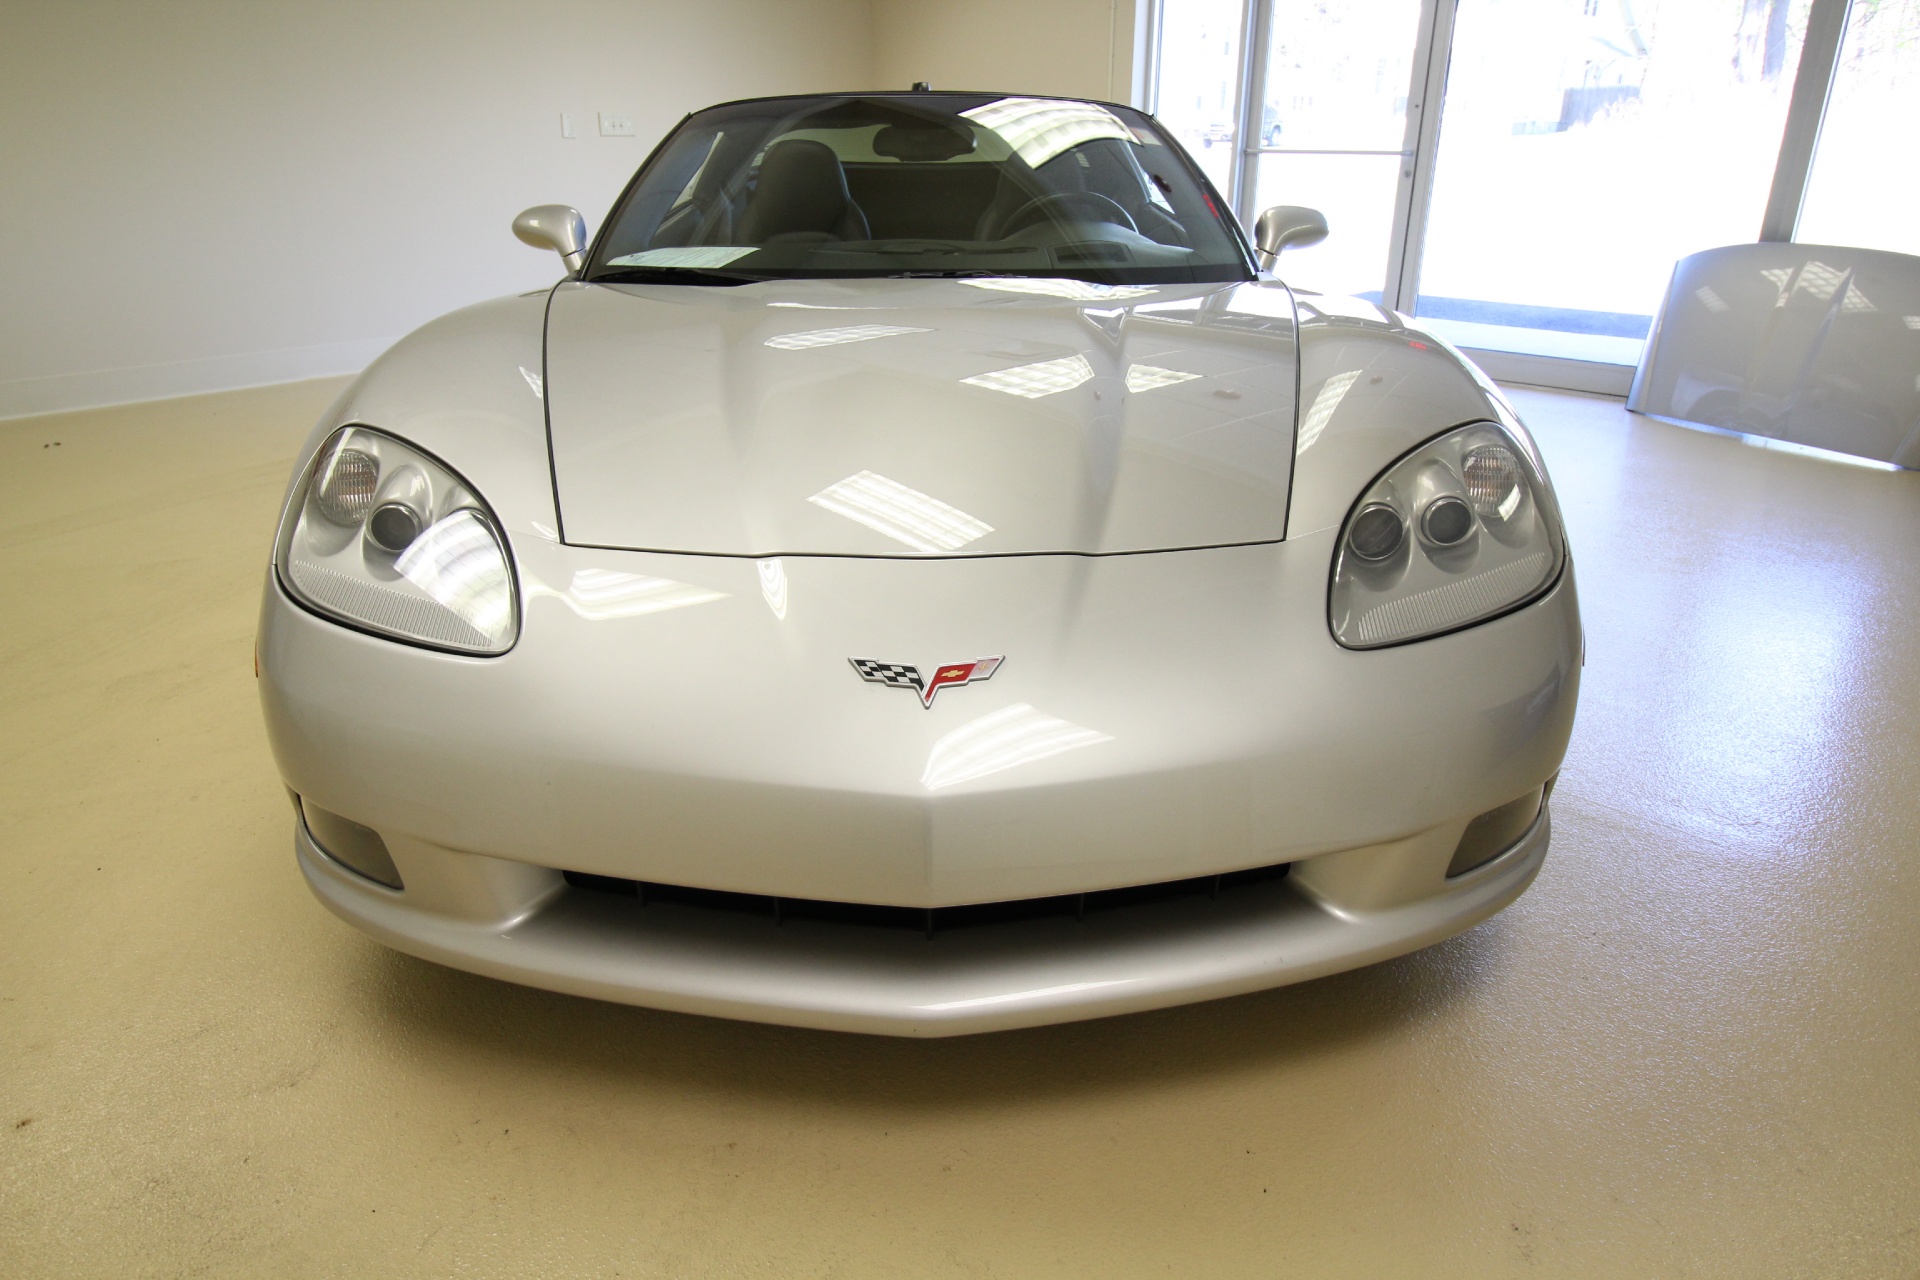 Used 2005 Silver Chevrolet Corvette 1 OWNER,LOW MILES,VERY CLEAN,HEADS-UP,SPORT SEATS AND MORE | Albany, NY